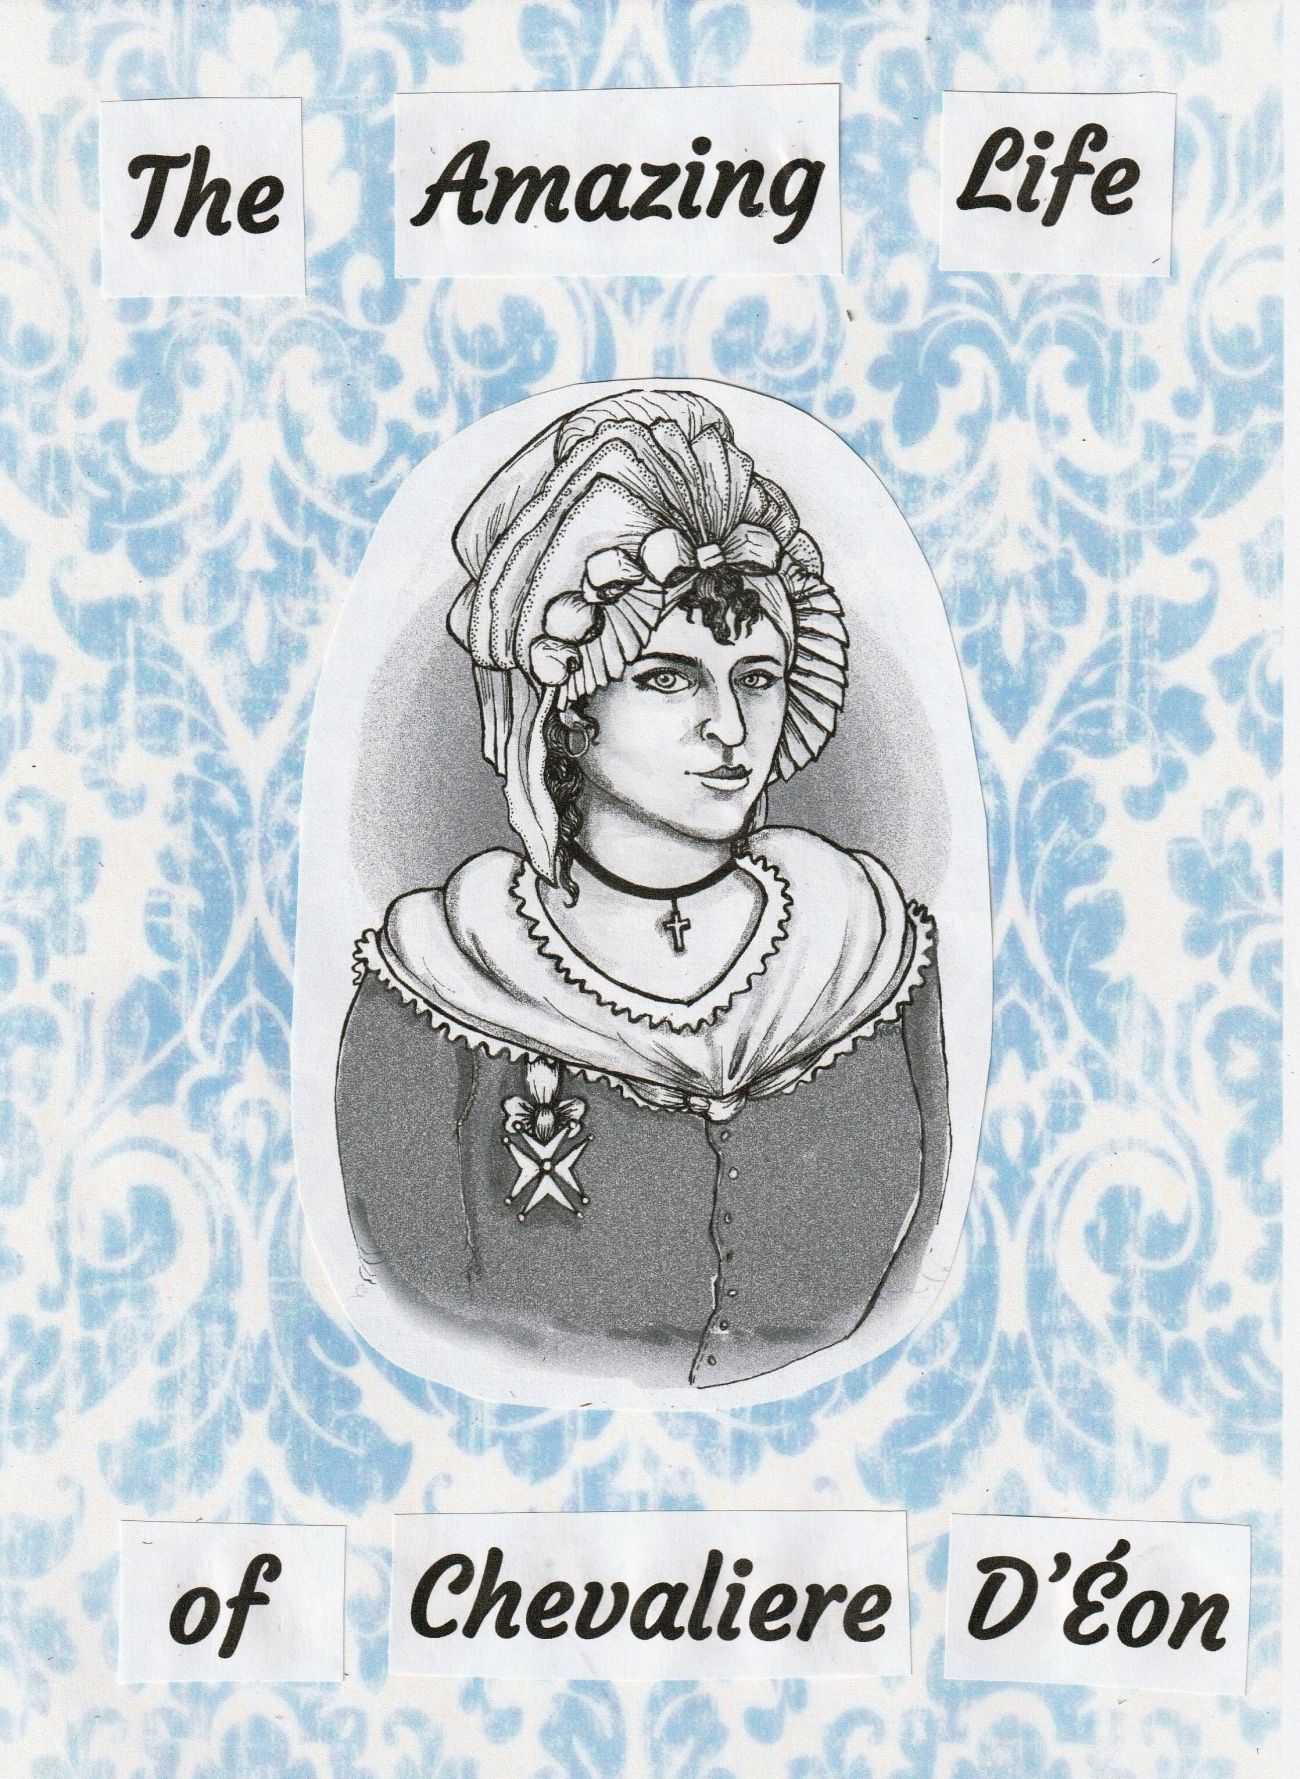 line drawing of 18th century woman in a dress and bonnet, wearing a medal.